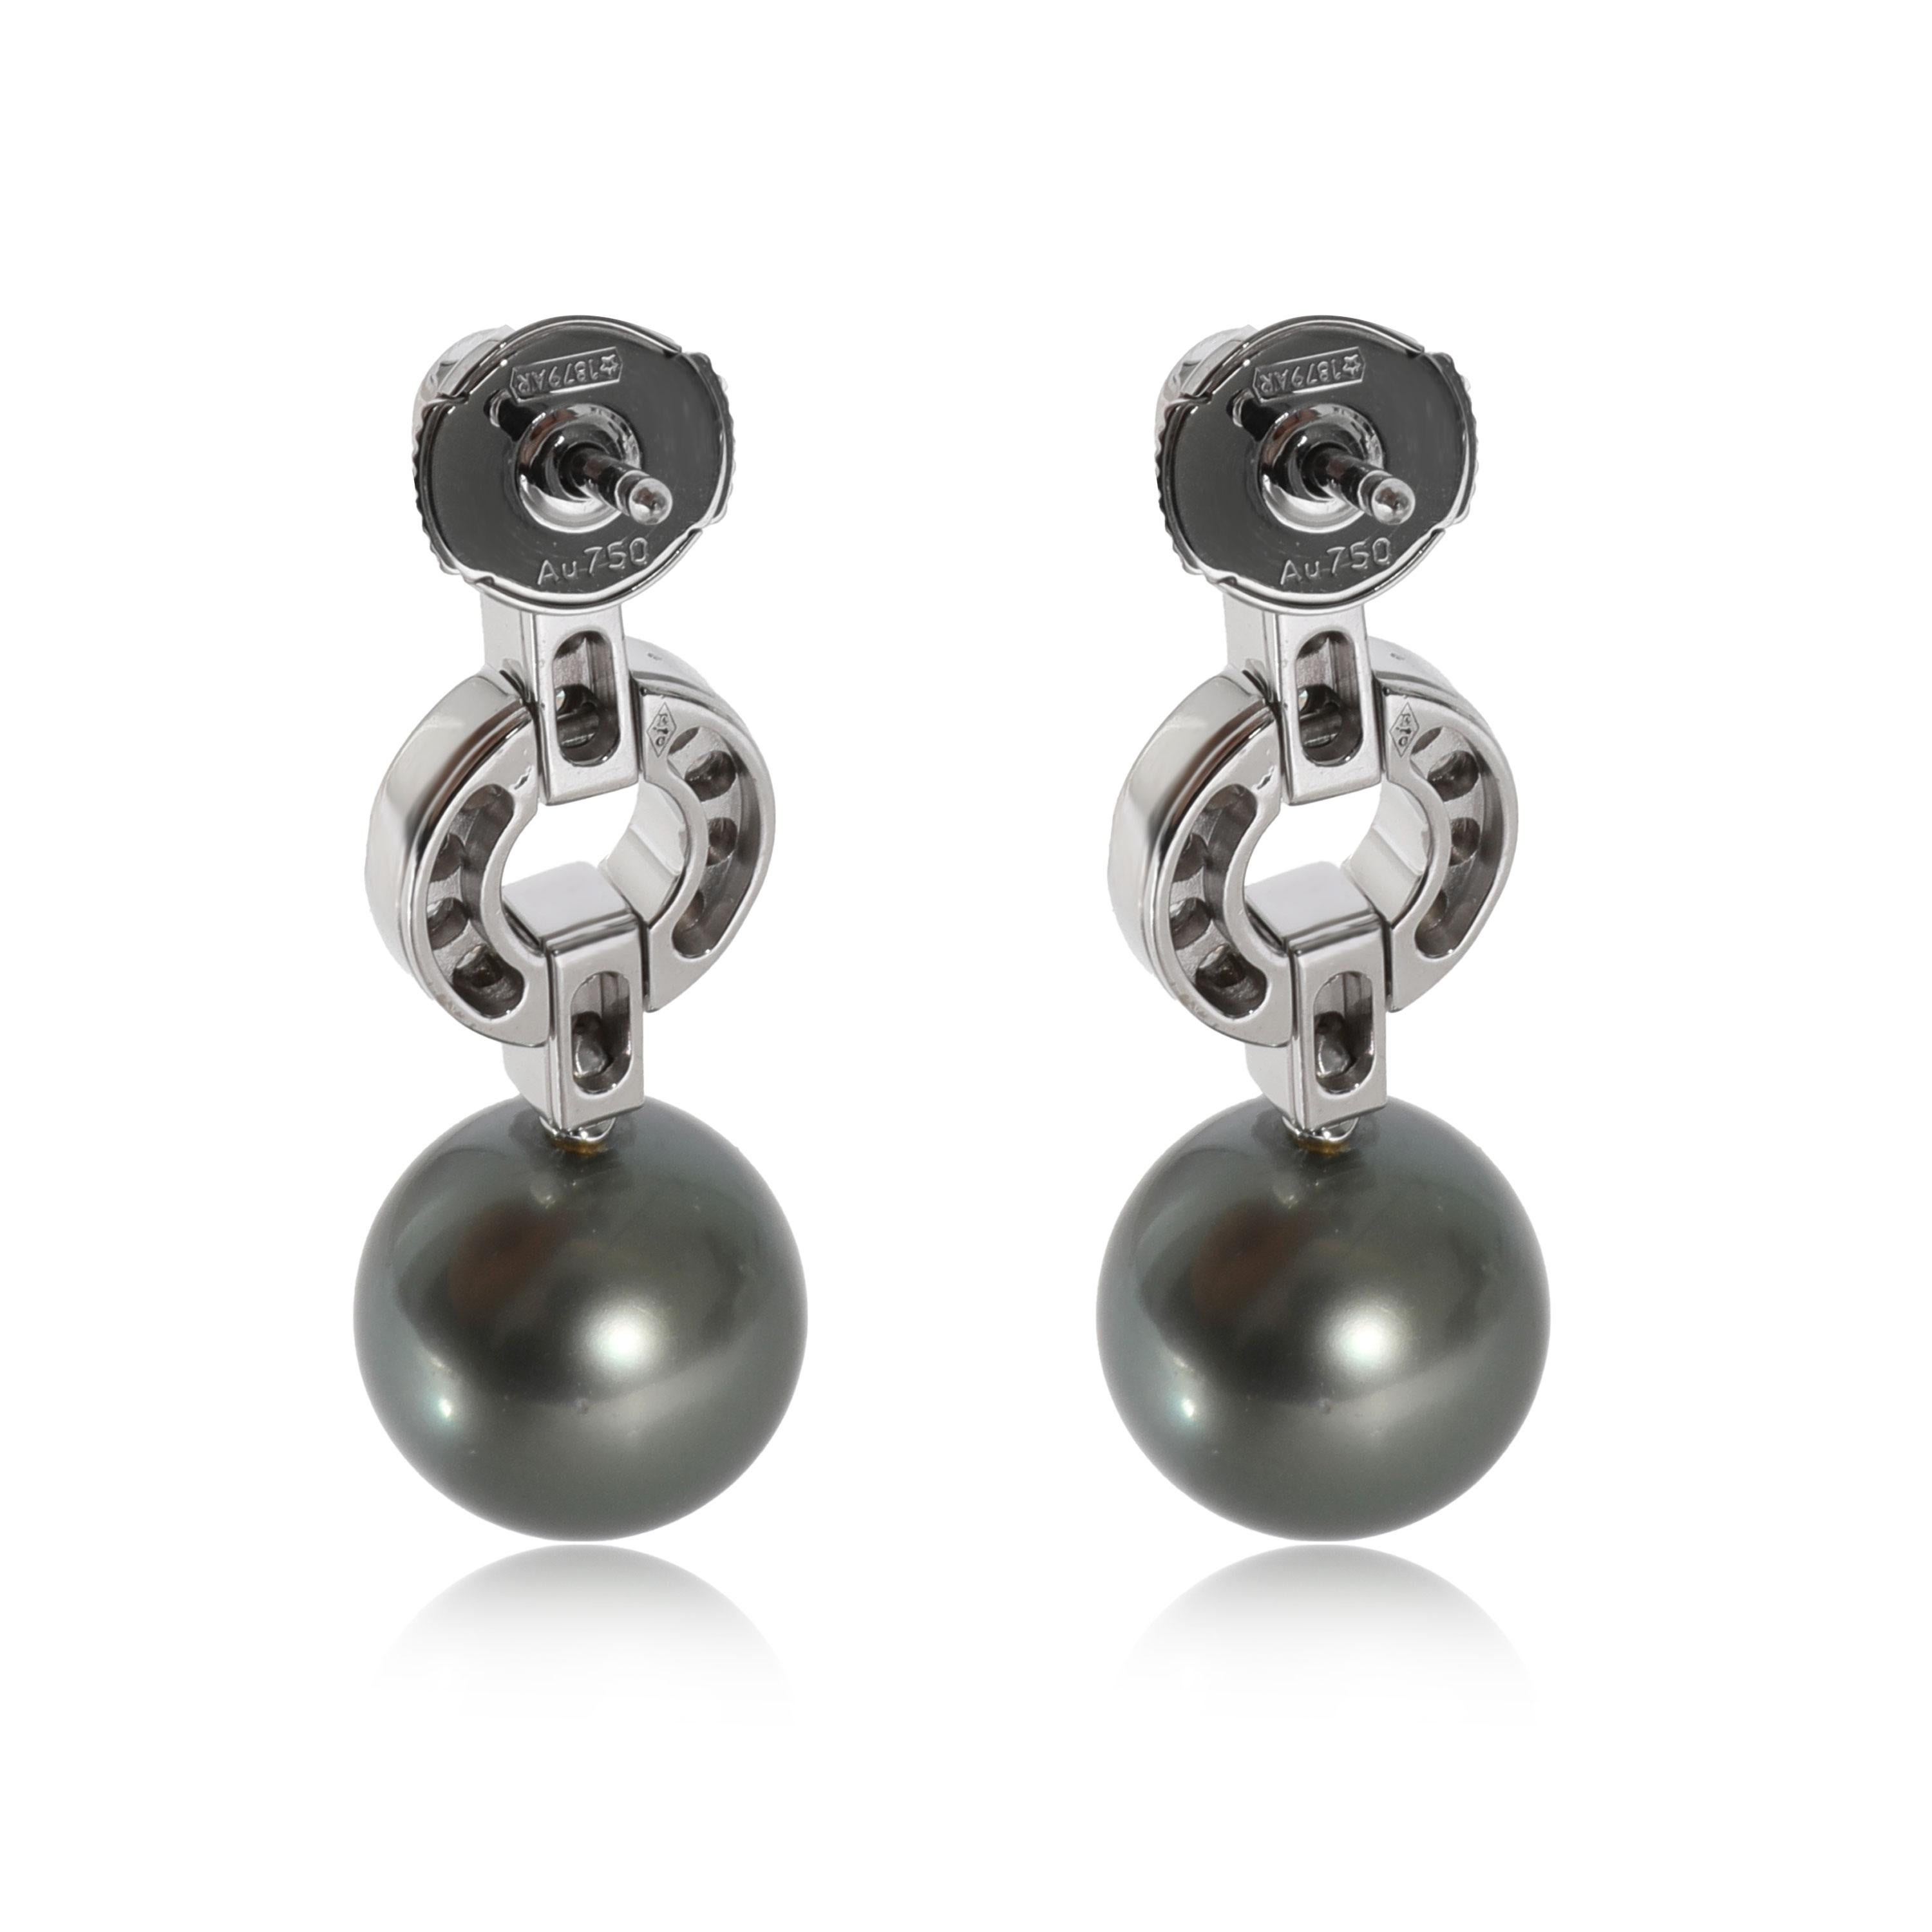 Cartier Himalia Pearl Diamond Earrings in 18k White Gold 0.85 CTW

PRIMARY DETAILS
SKU: 120881
Listing Title: Cartier Himalia Pearl Diamond Earrings in 18k White Gold 0.85 CTW
Condition Description: Retails for 22700 USD. In excellent condition and